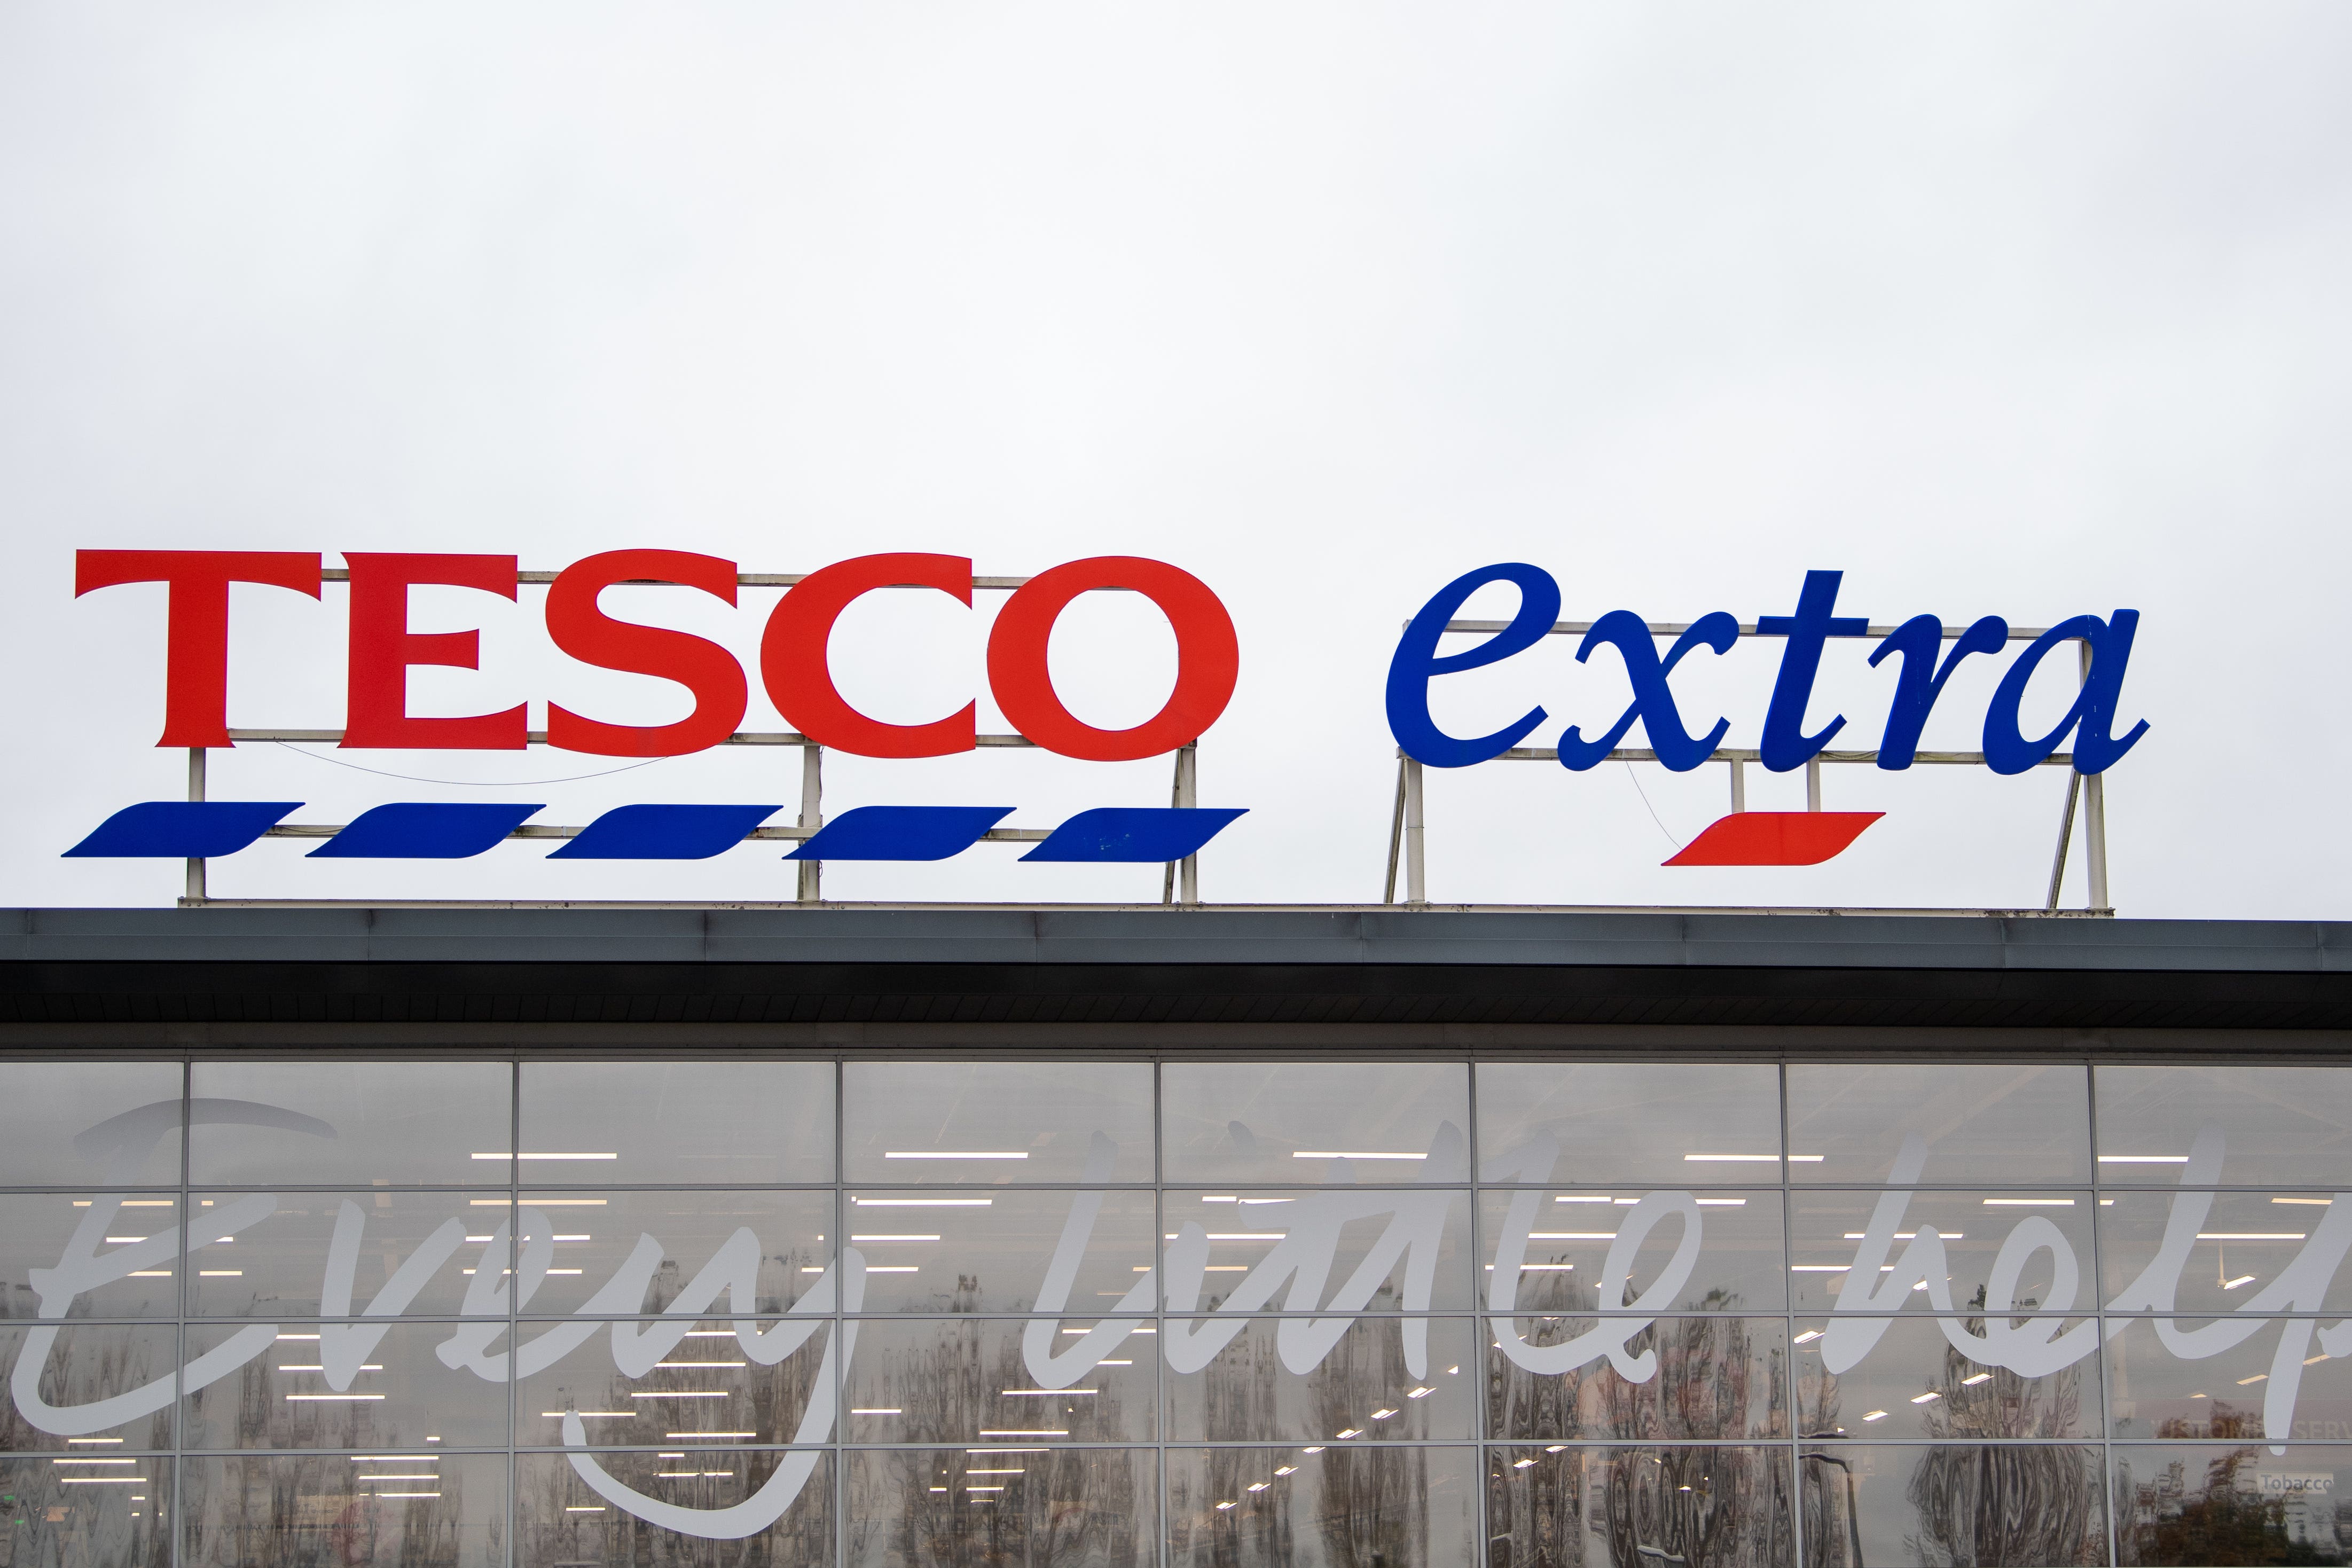 Tesco has bought the Paperchase brand and intellectual property